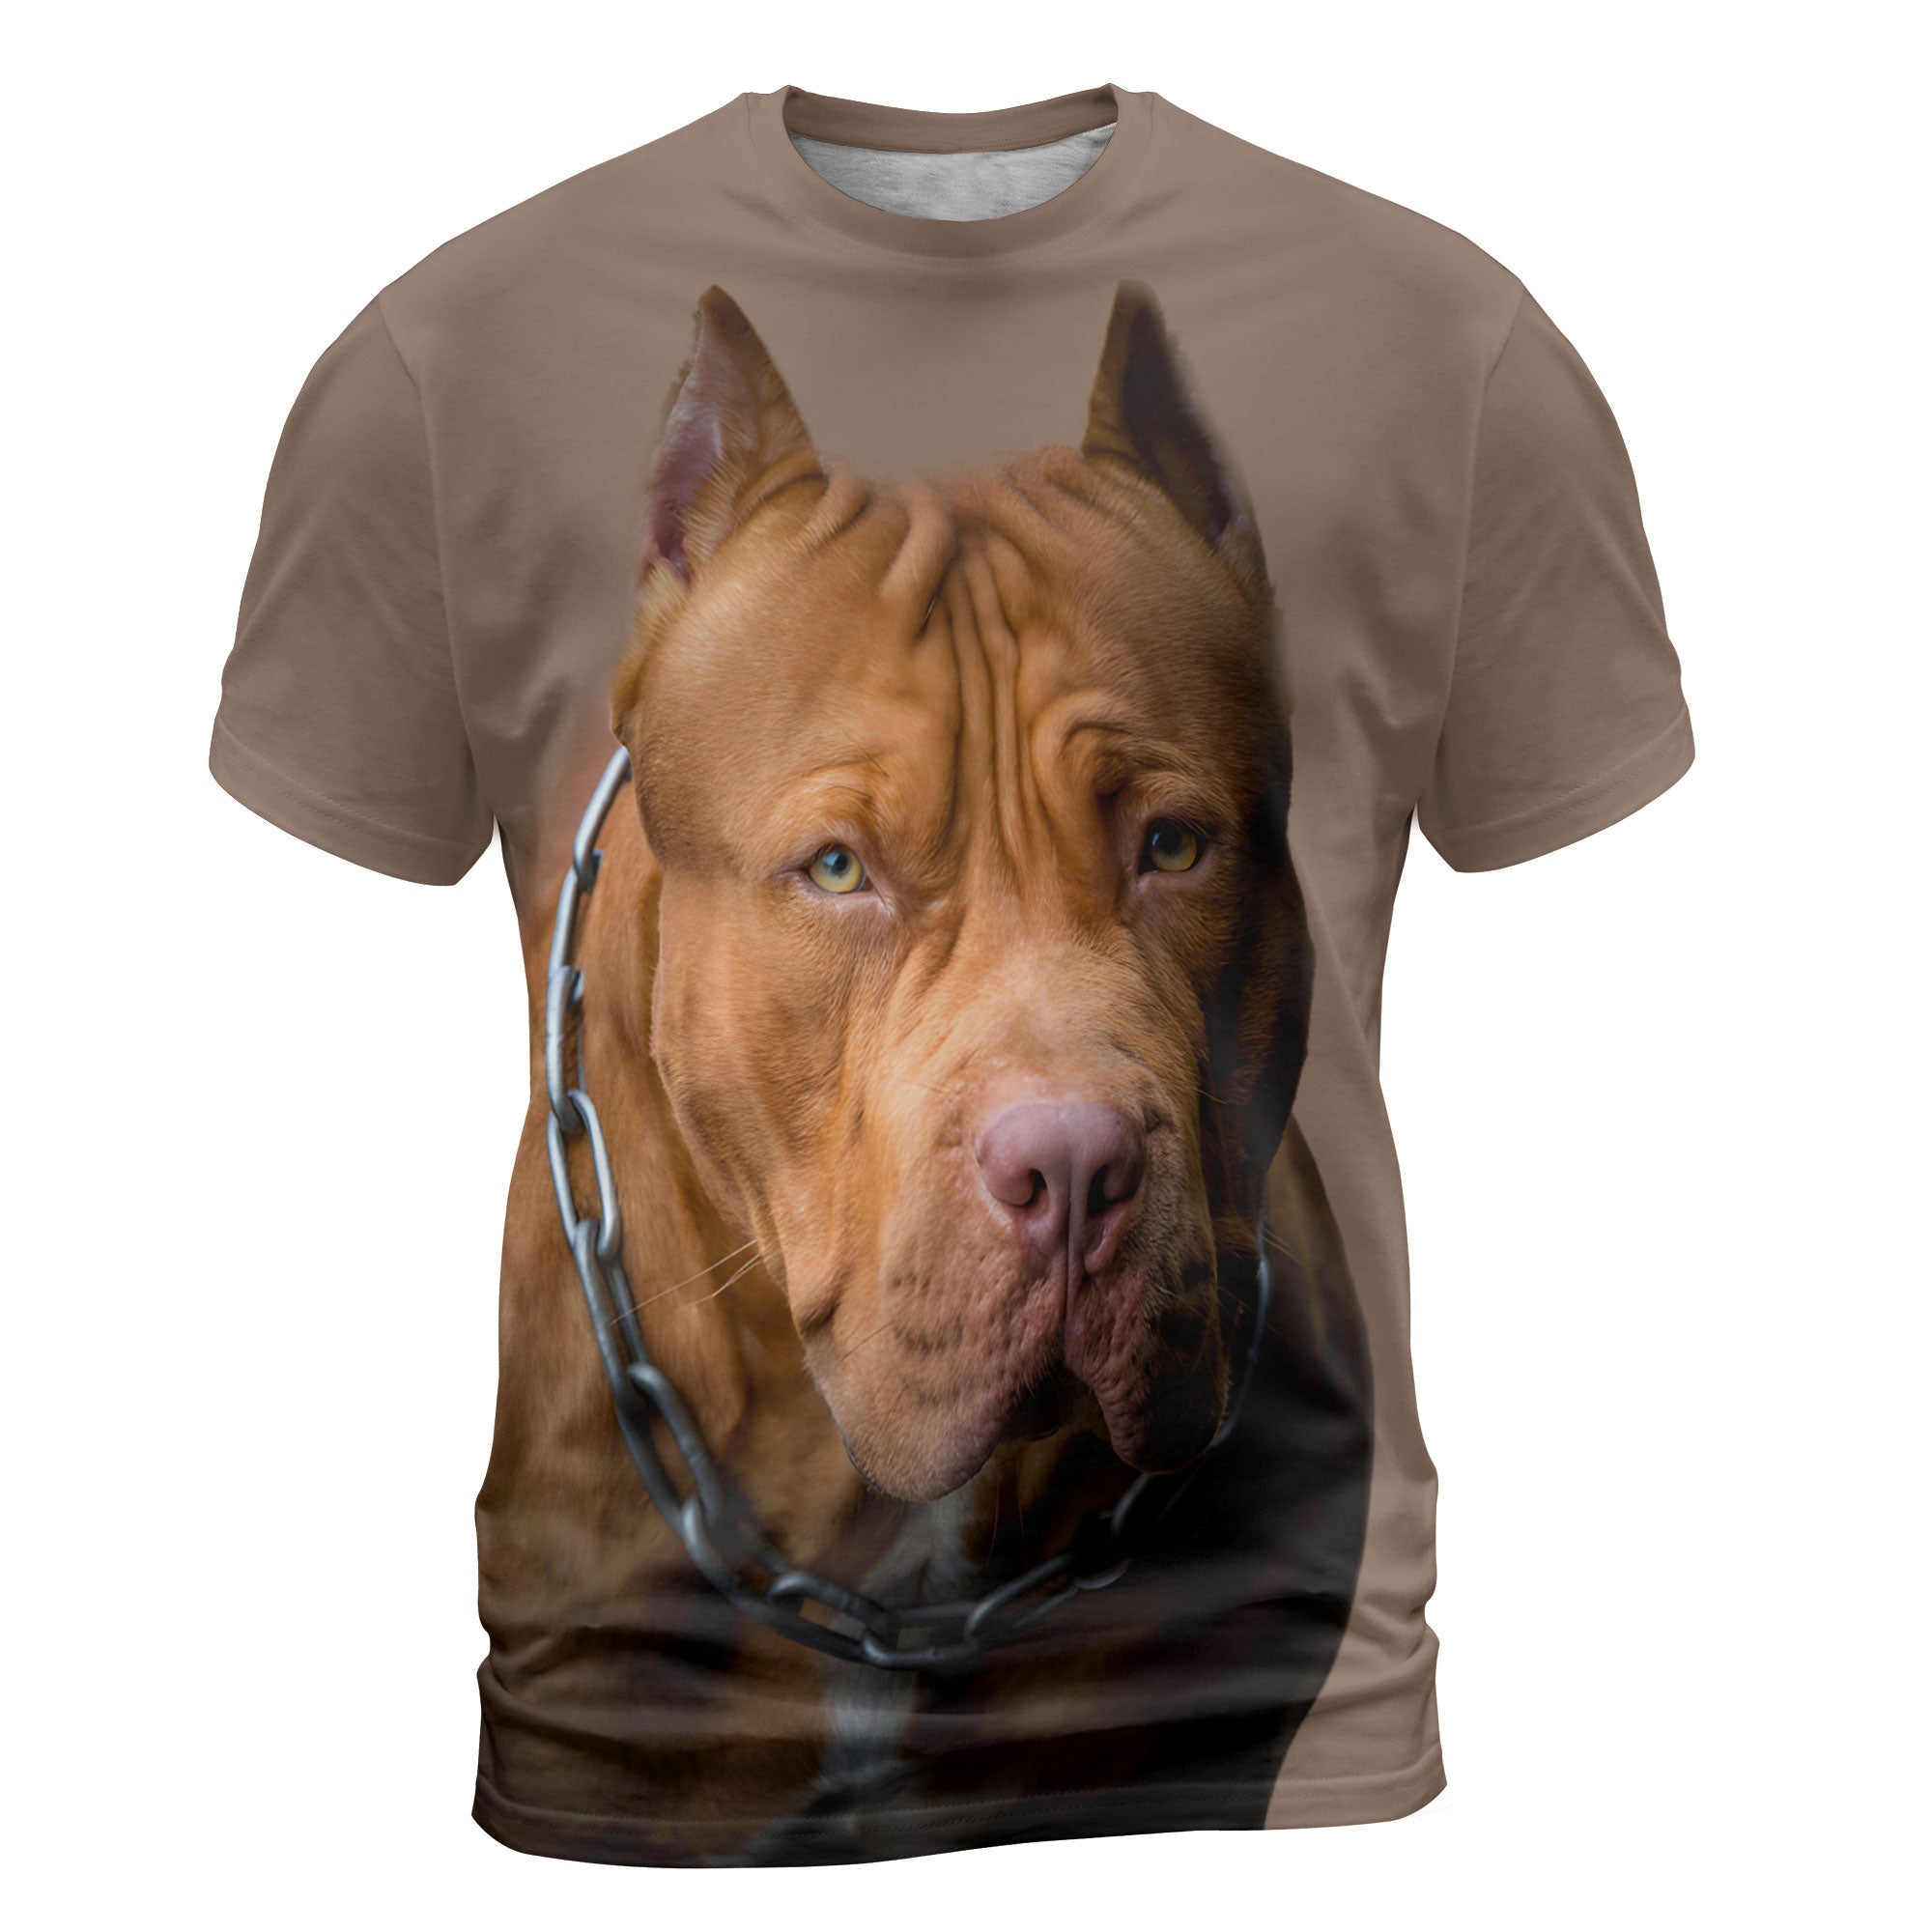 American Pit Bull Terrier - 3D Graphic T-Shirt